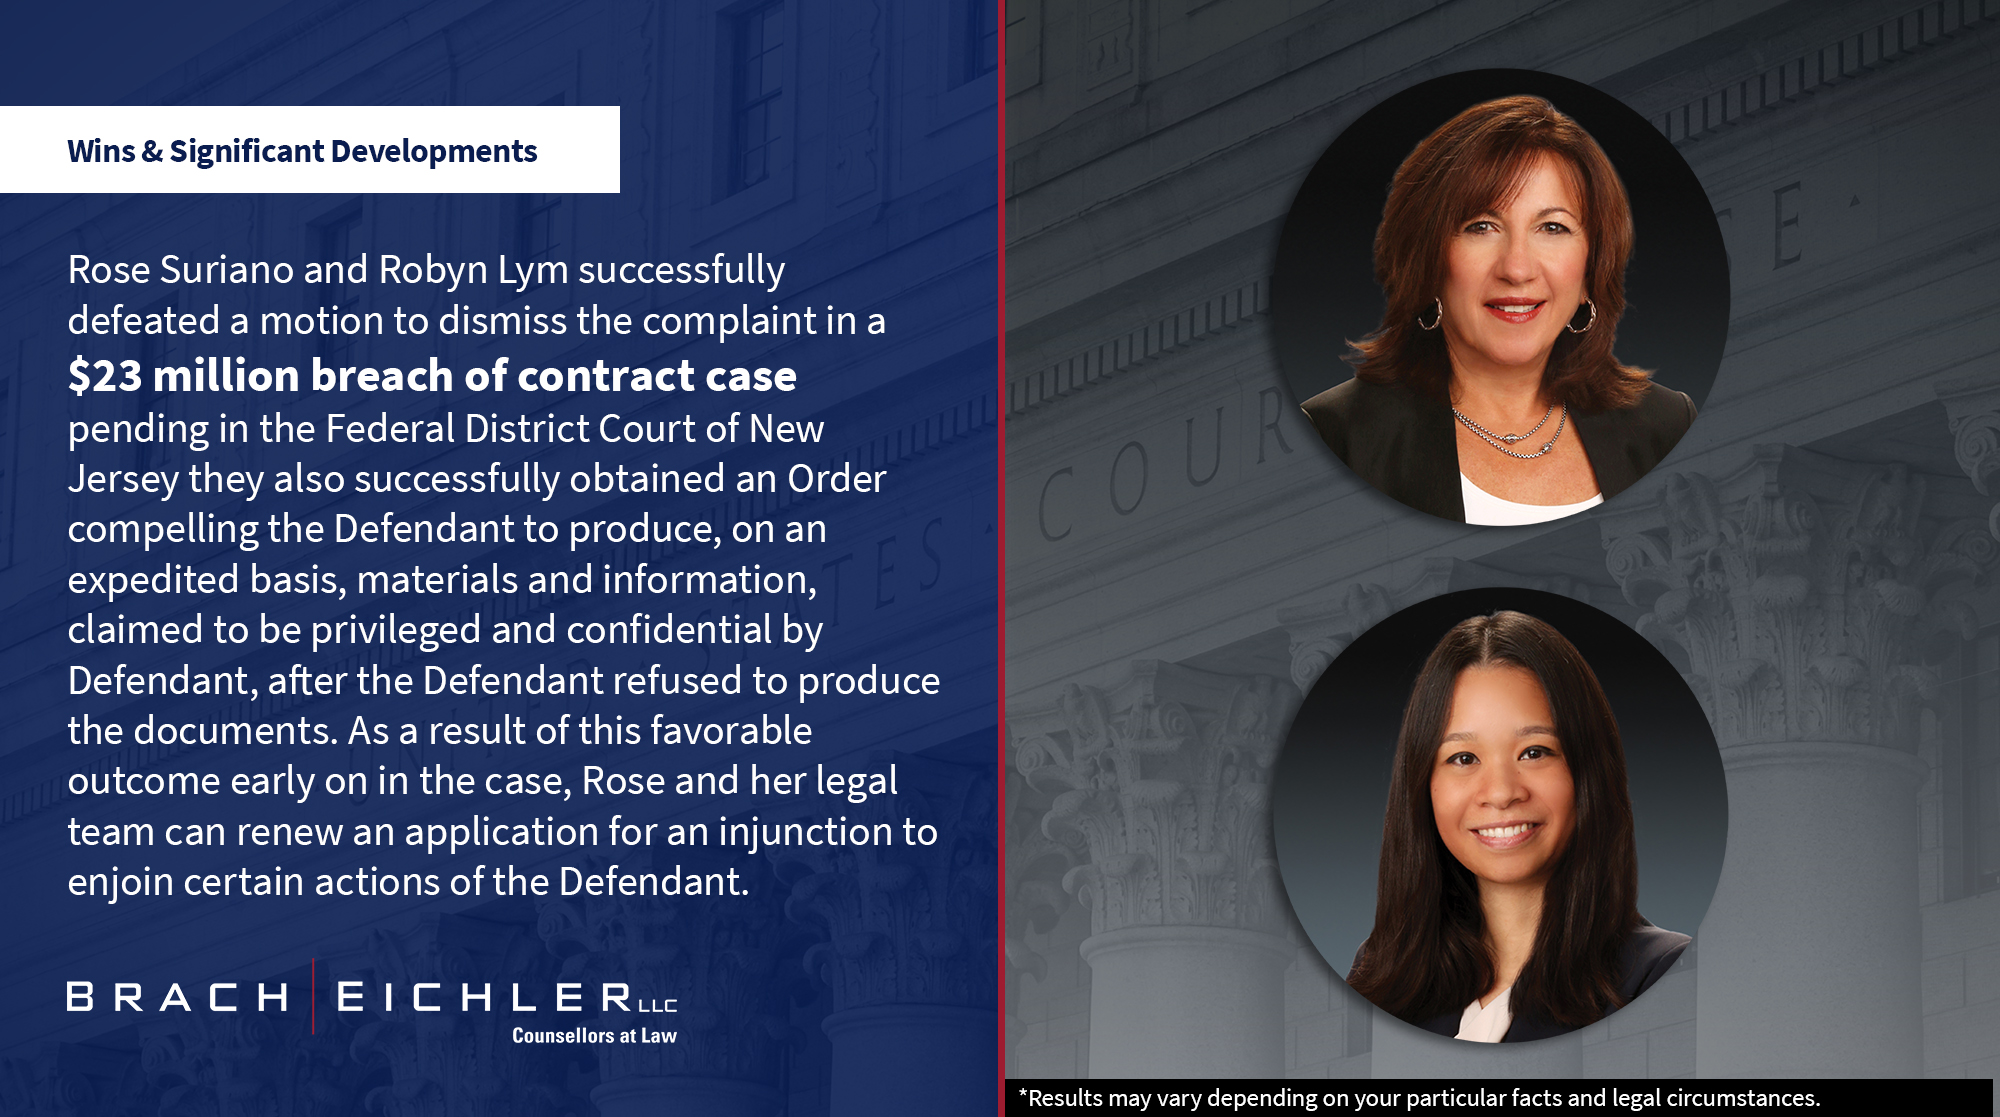 Rose Suriano and Robyn Lym successfully defeated a motion to dismiss the complaint in a $23 million breach of contract case